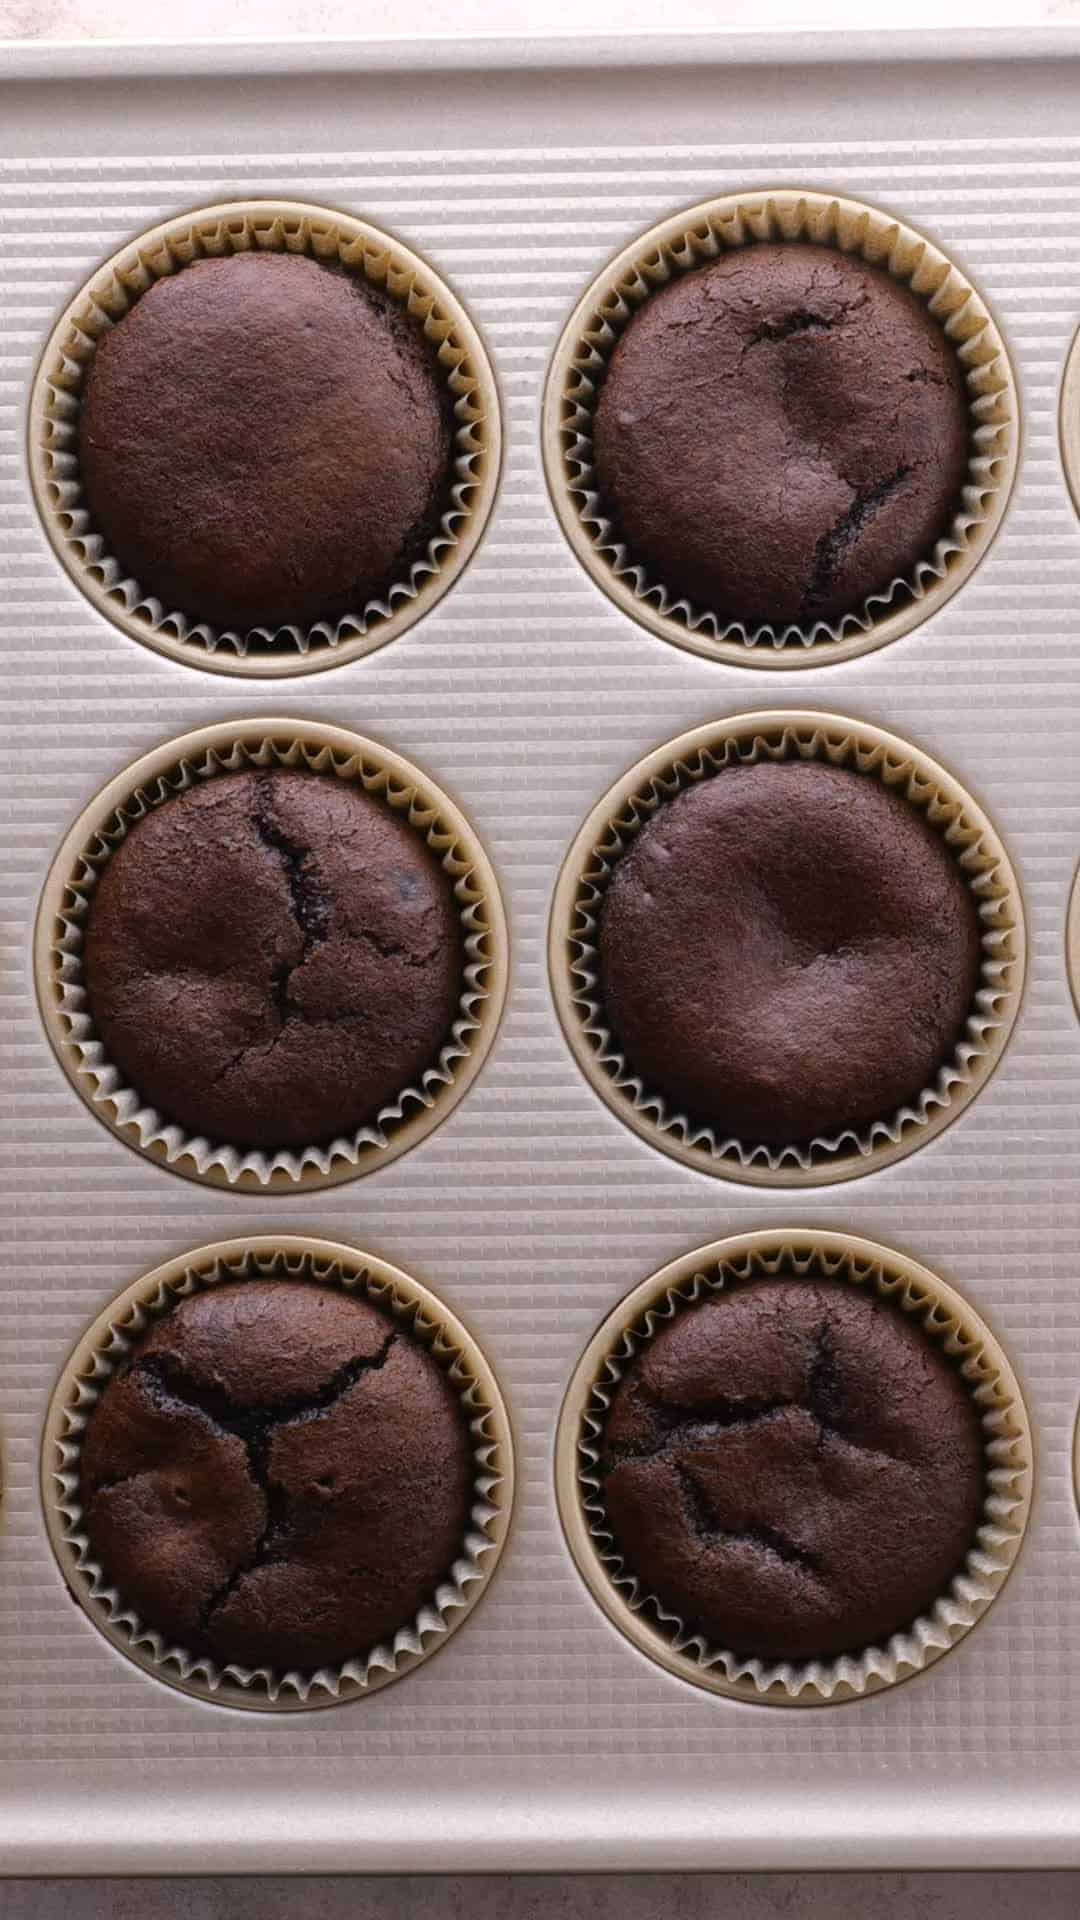 Chocolate cupcakes with crackly tops in a muffin pan